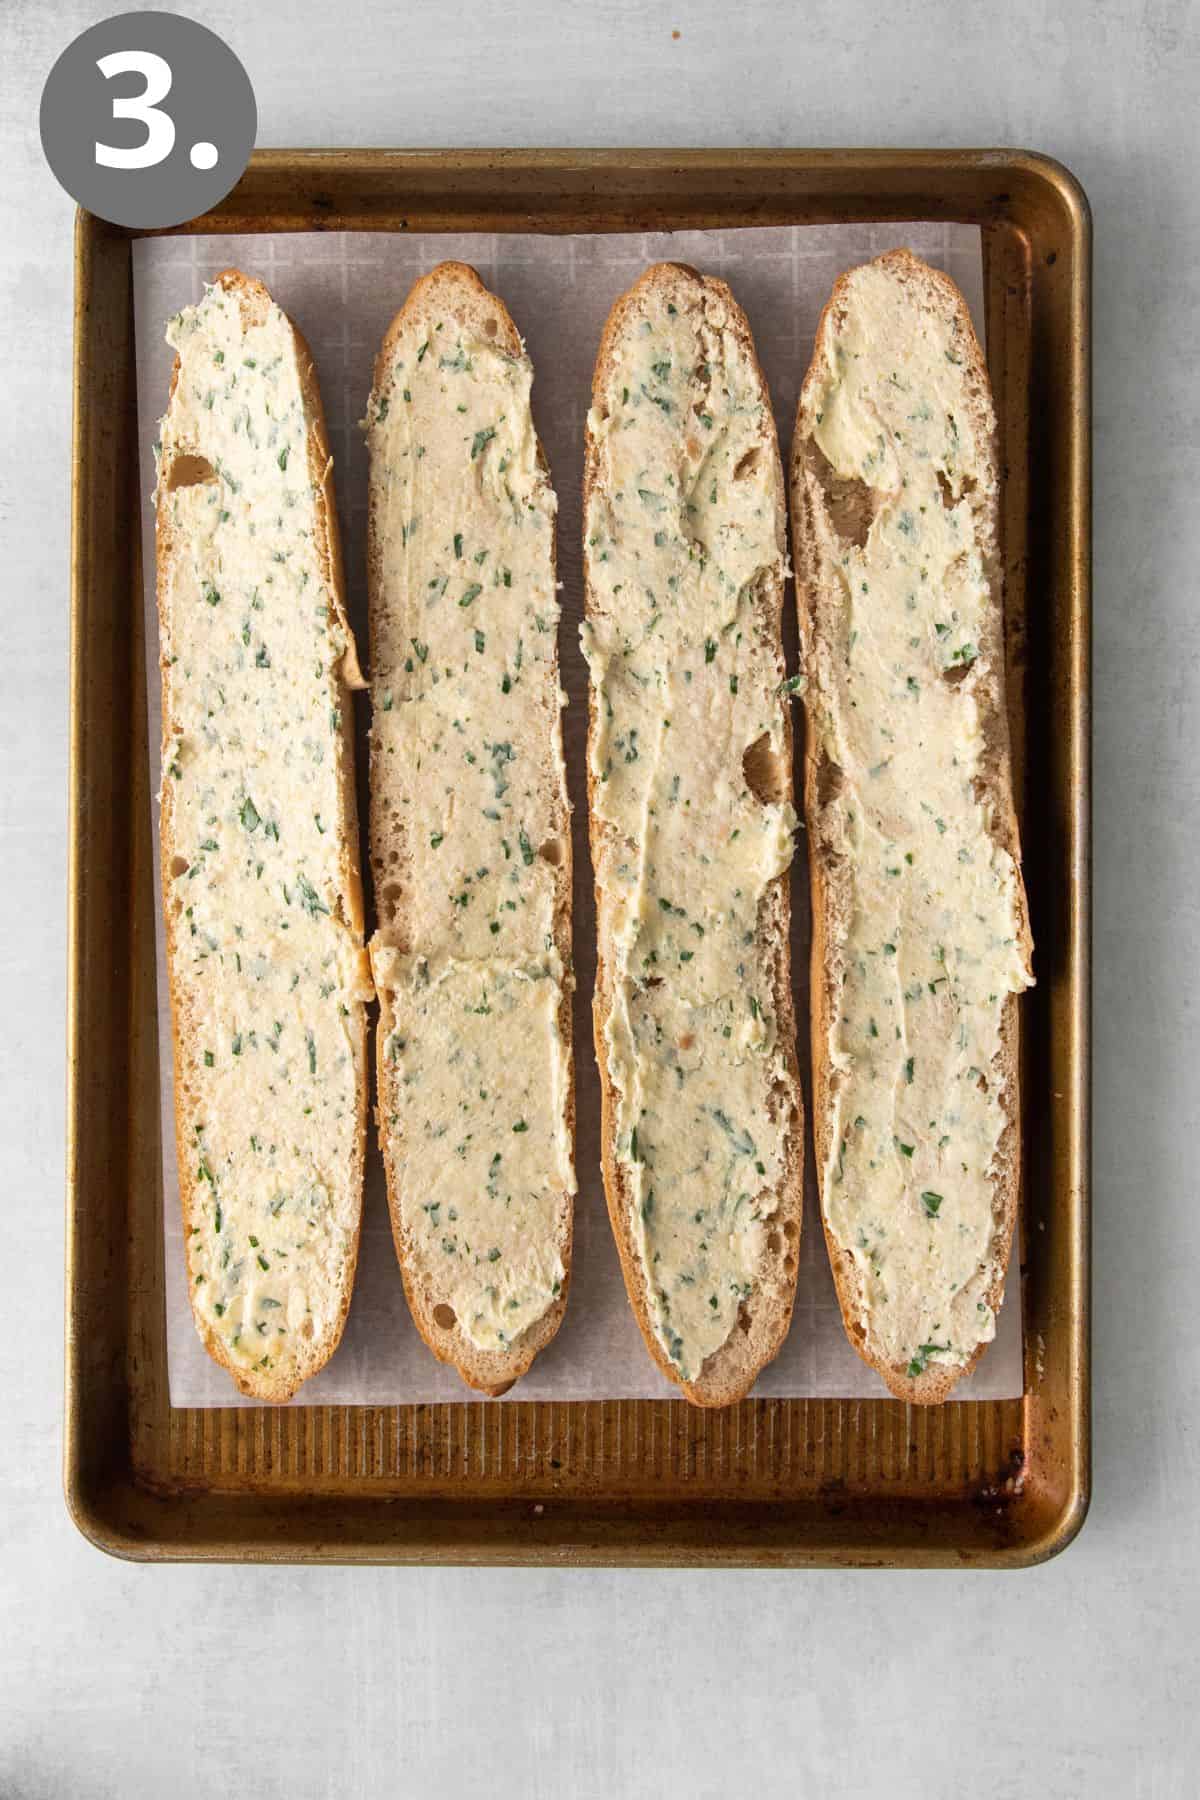 Gluten-free bread with garlic butter slathered on top, ready to be baked on a baking sheet